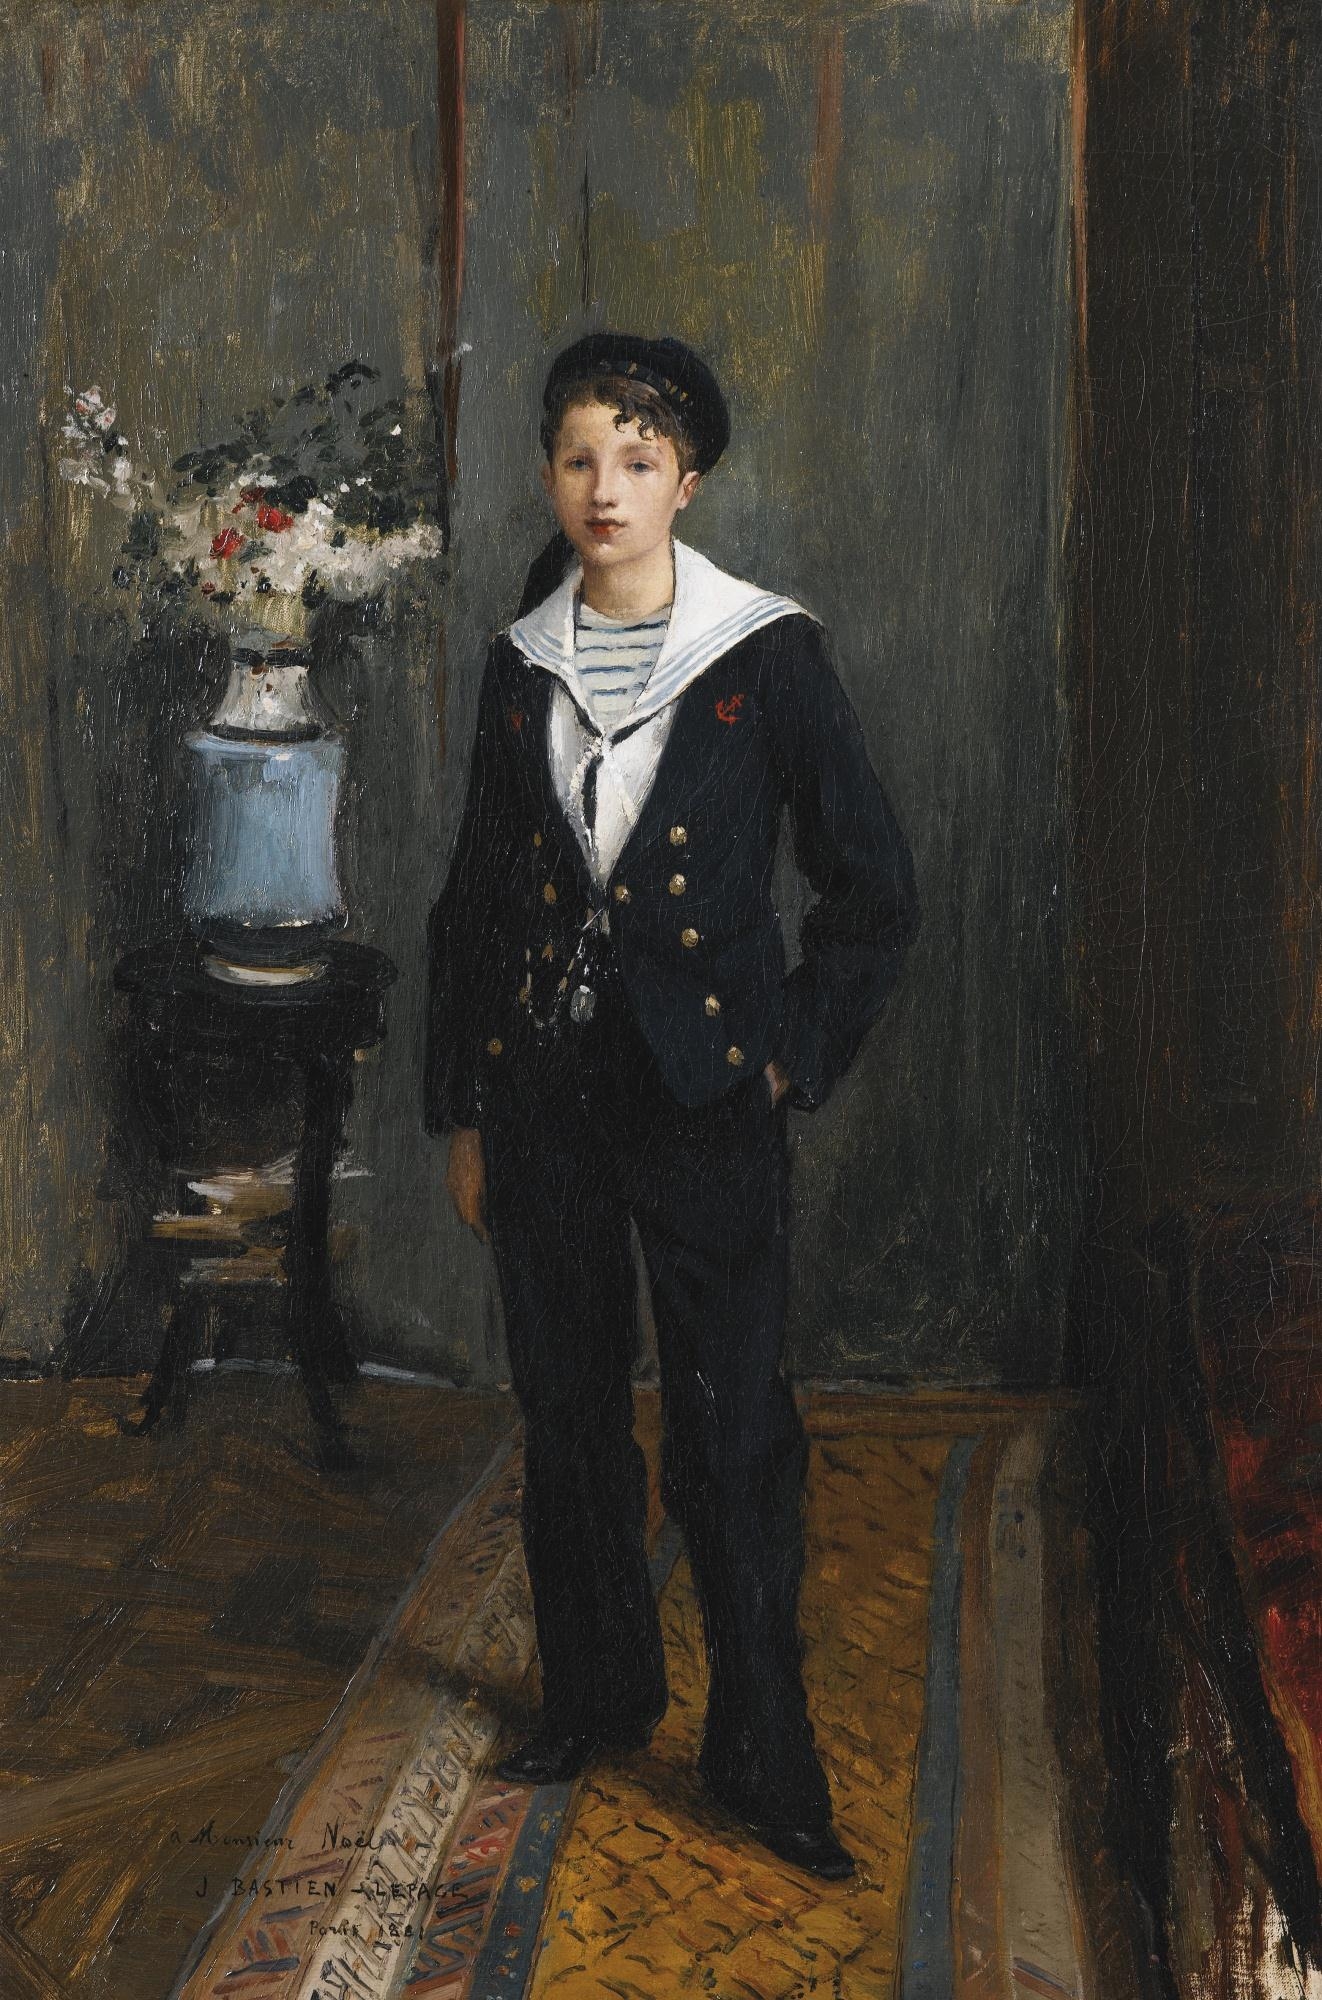 PORTRAIT OF A YOUNG BOY by Jules Bastien-Lepage